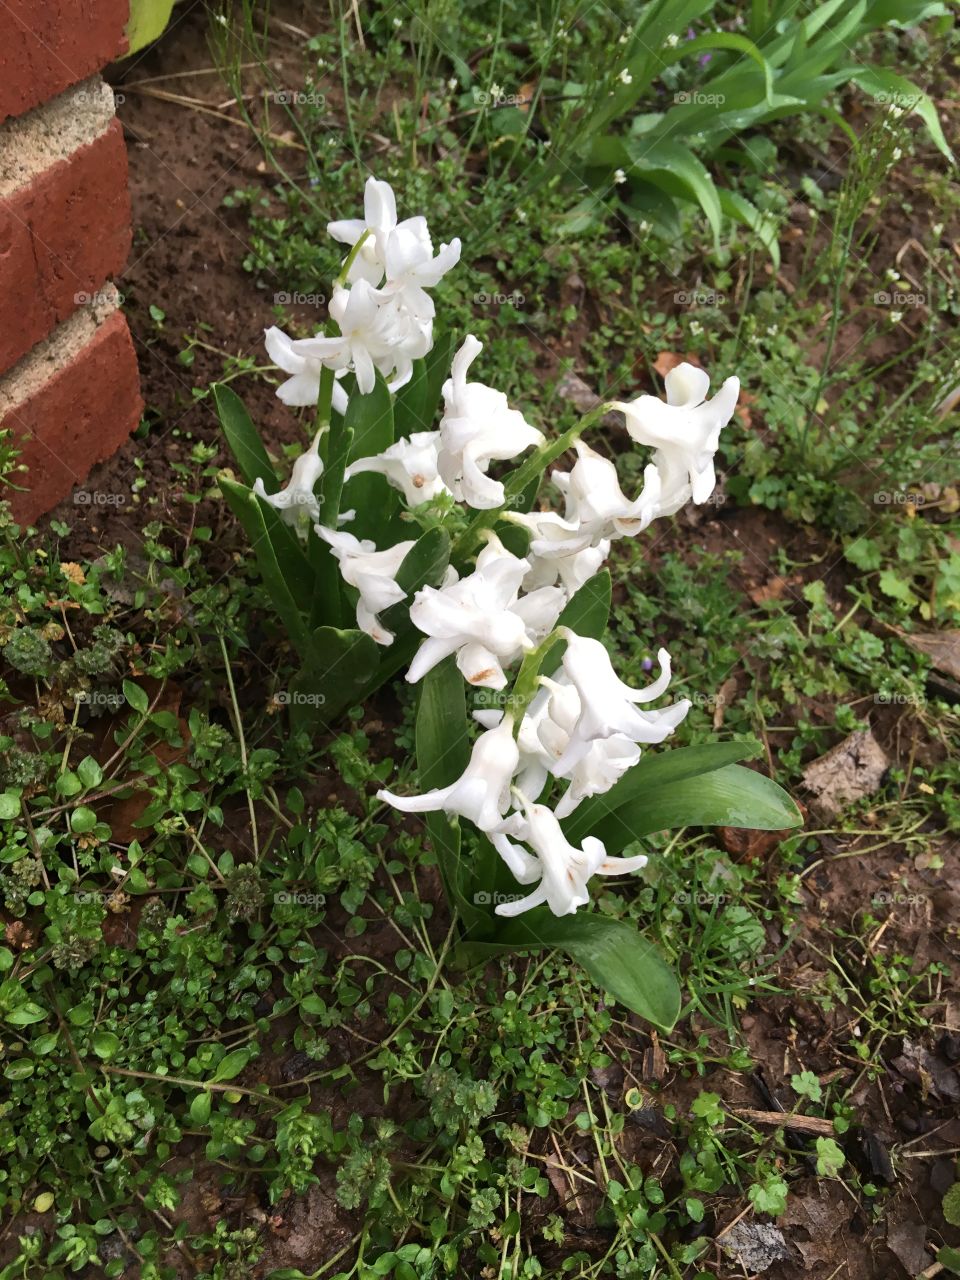 My pretties white hyacinths blooming happily in one of my flower gardens. Sweet smelling.